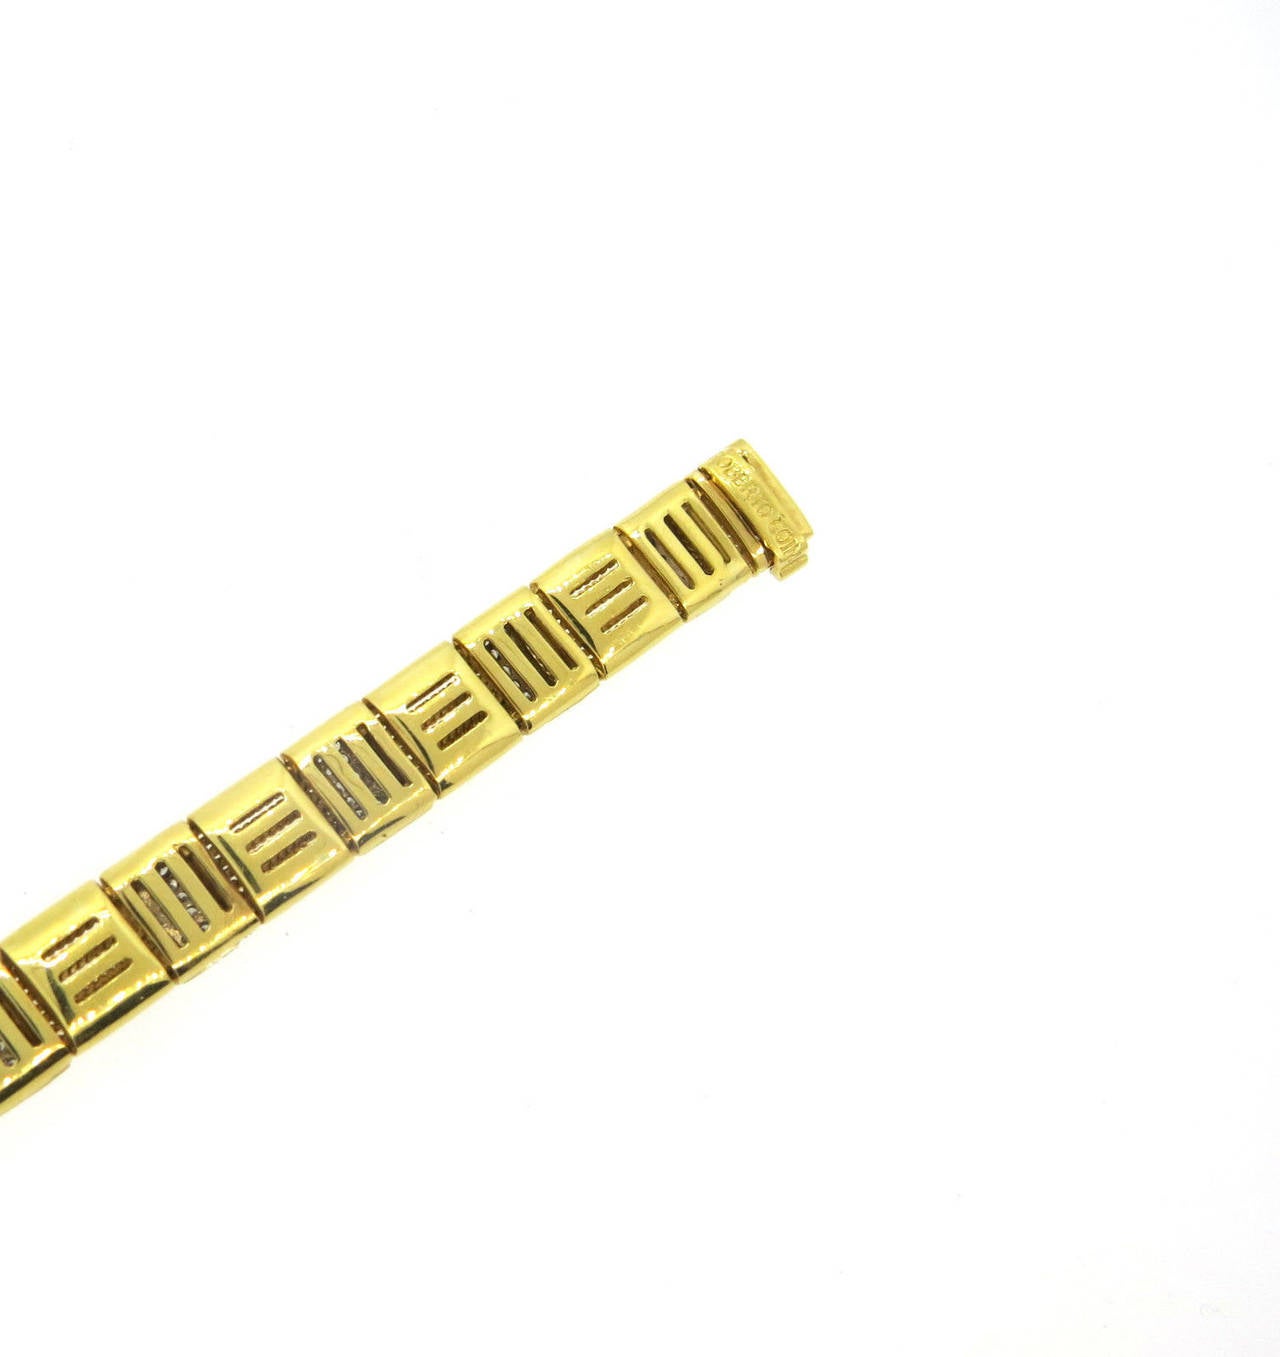 18k yellow gold multi-row bracelet, designed by Roberto Coin, featuring approximately 2.00ctw in diamonds. Bracelet is 7